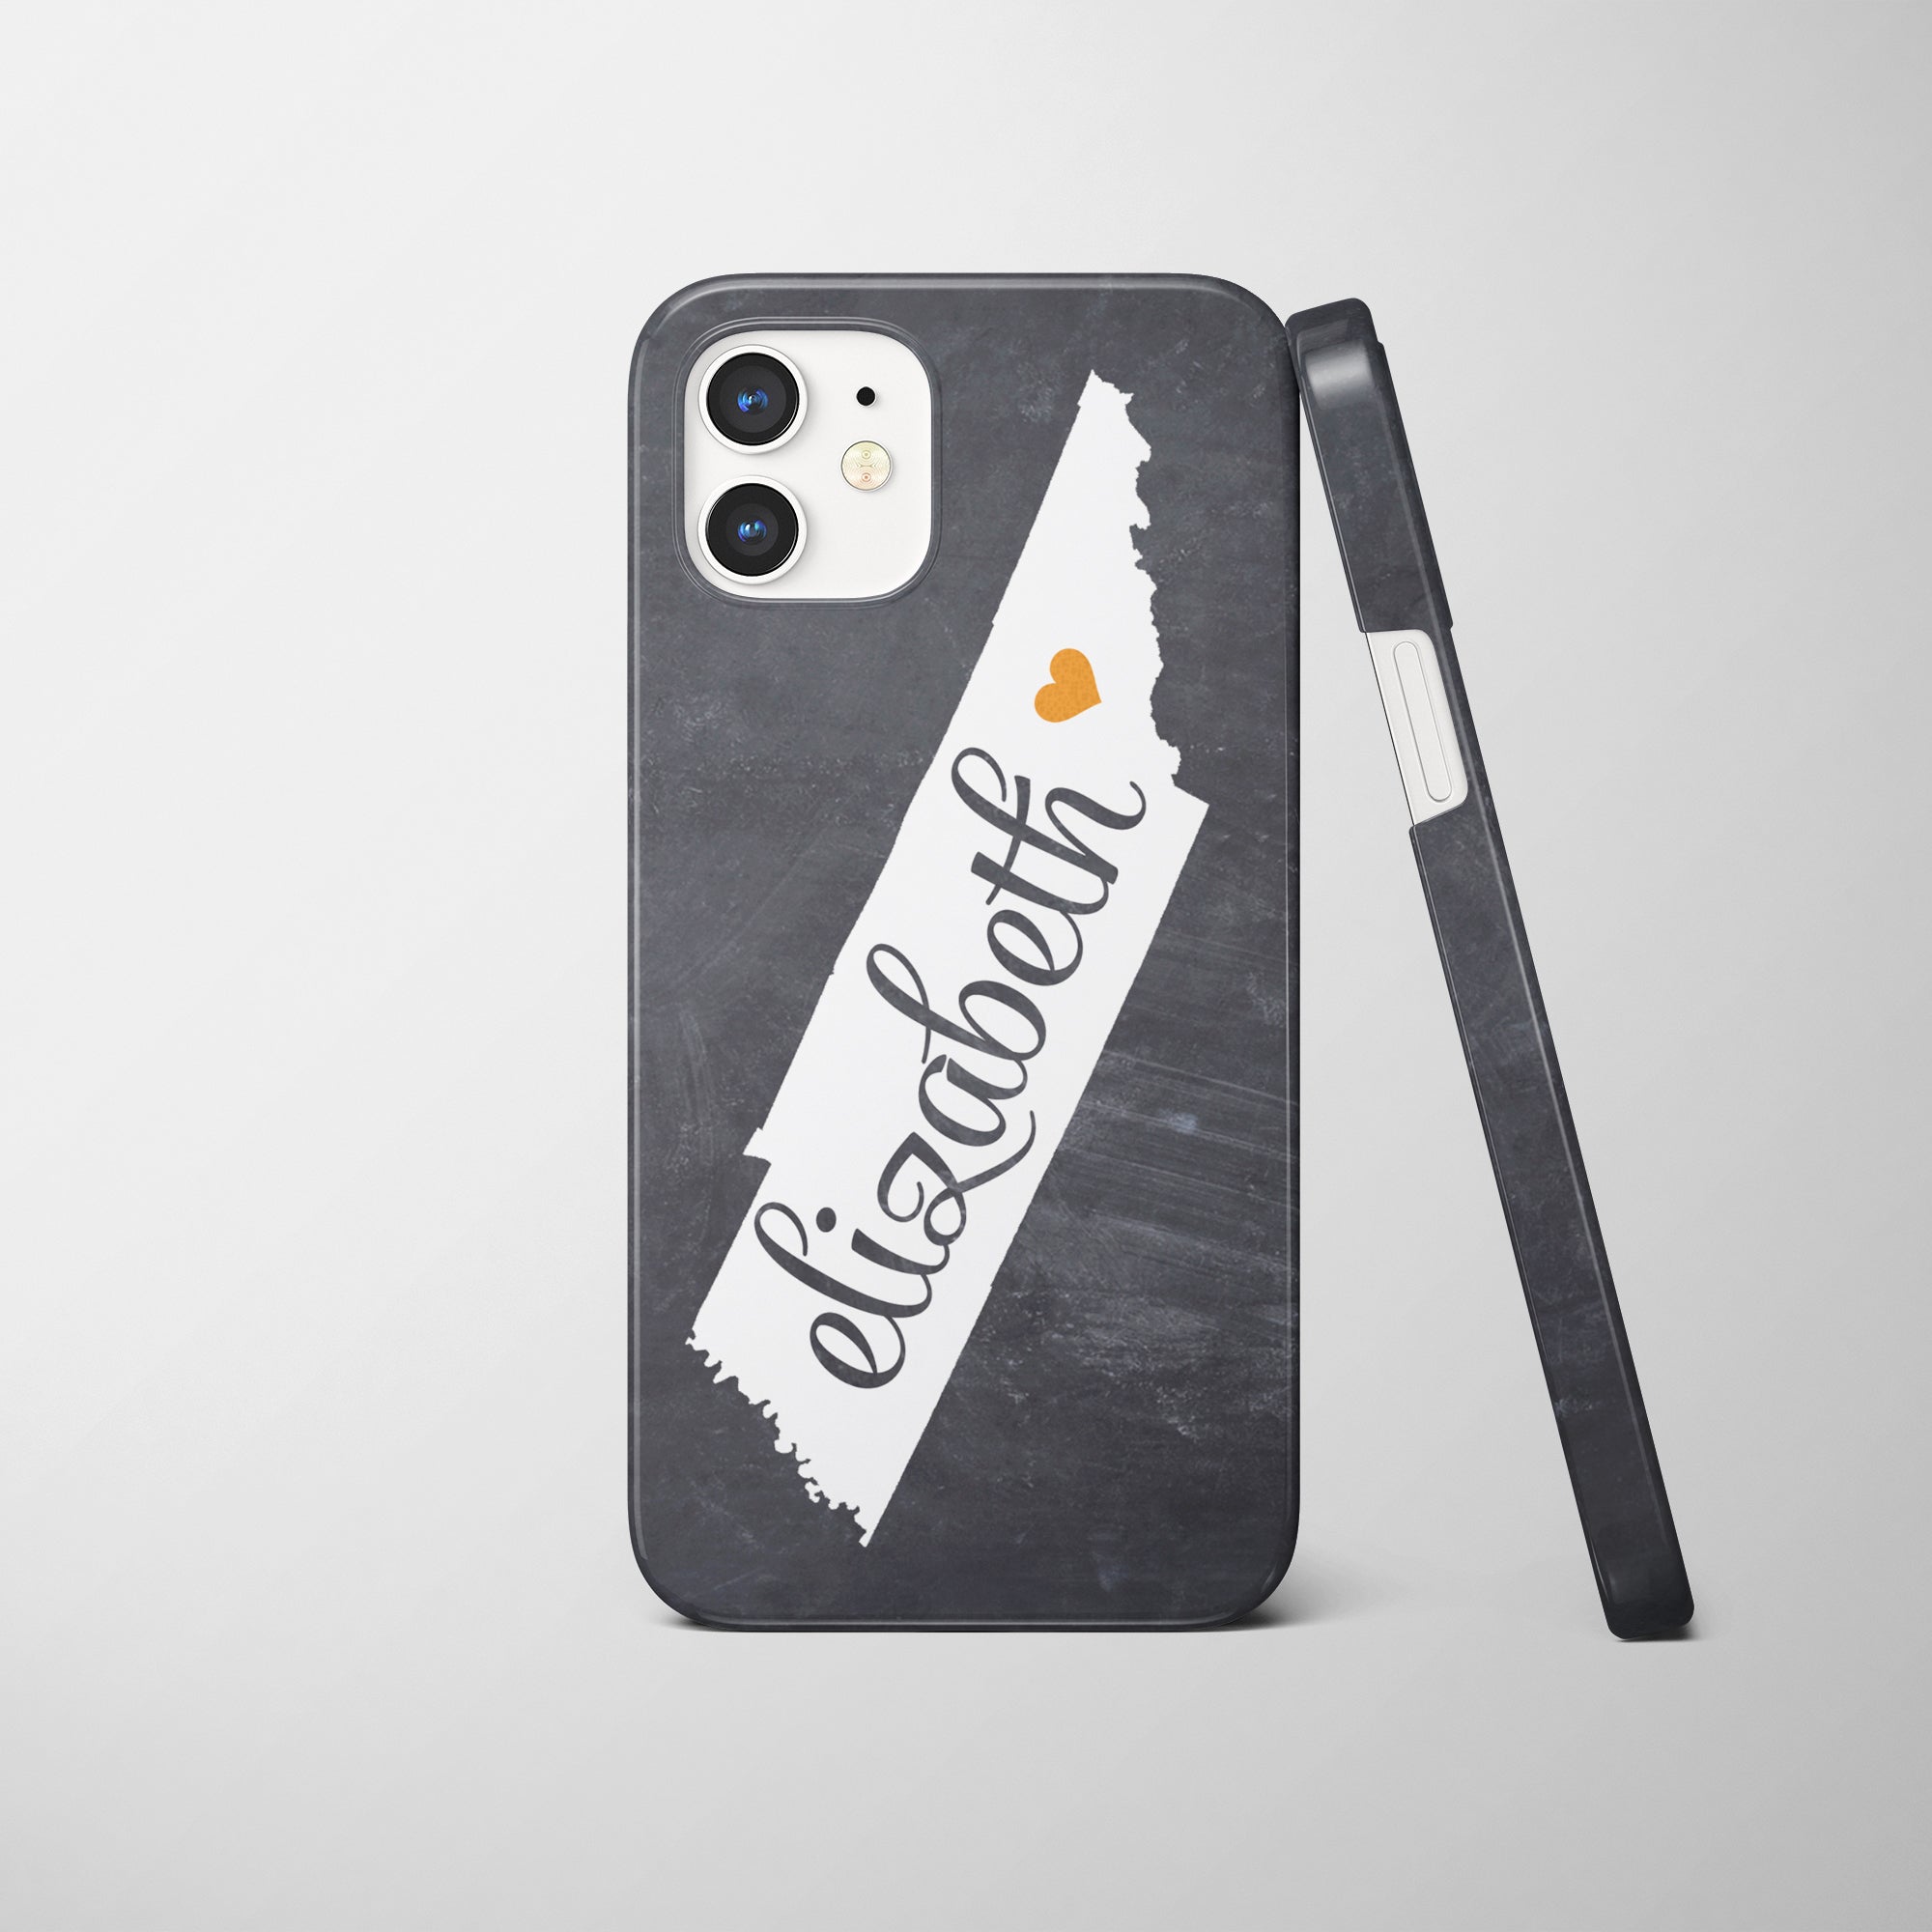 Tennessee iPhone case, personalized with a name and the heart over the city of your choice. City shown in sample is Knoxville, TN